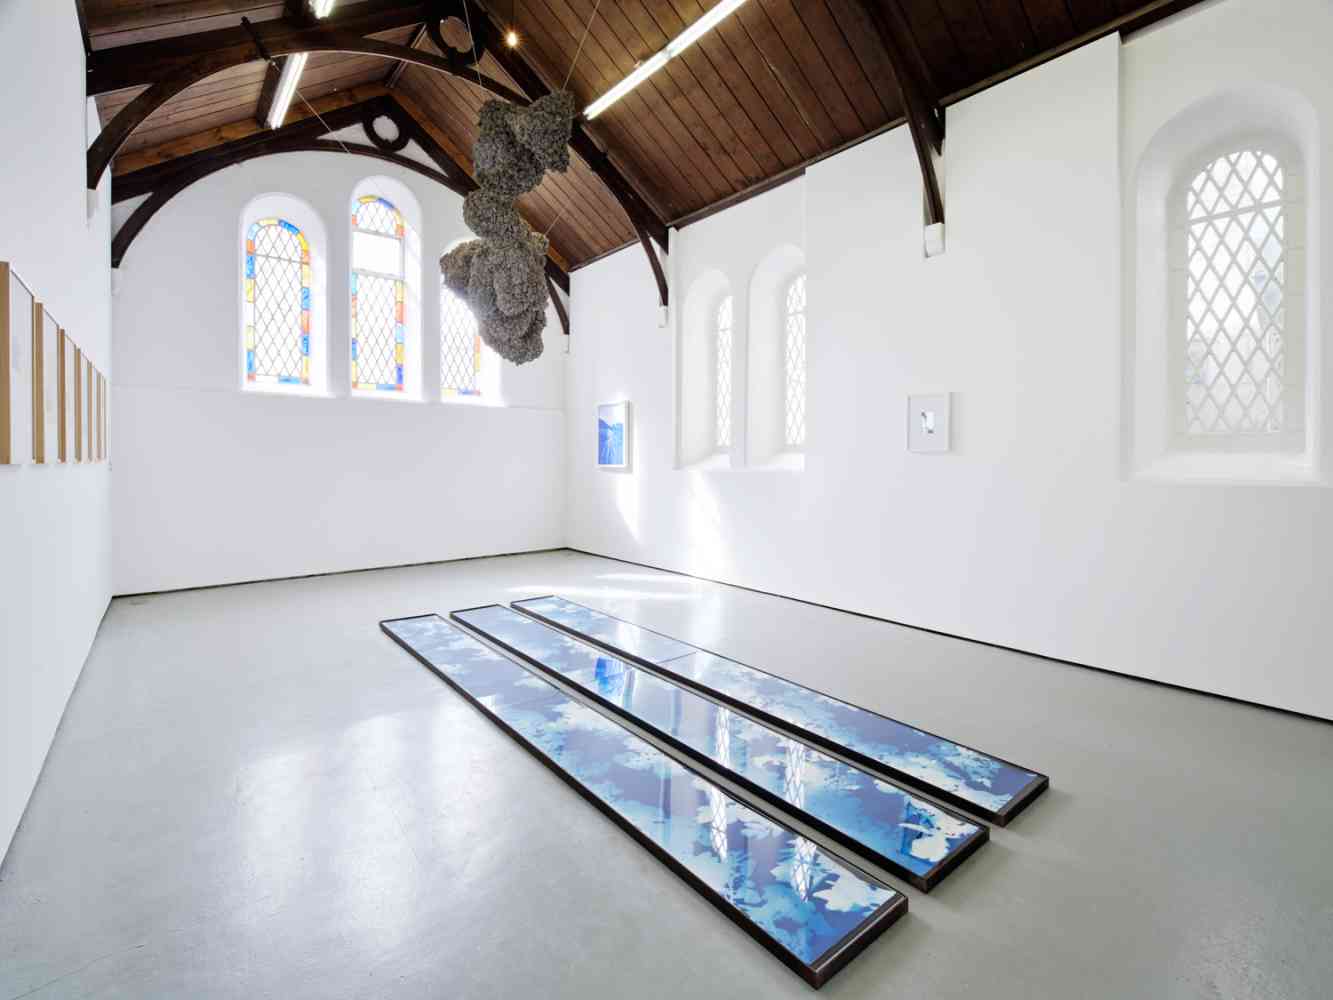 Lismore Castle Arts, 2023 - To Walk in the Image, curated by Susan Bright